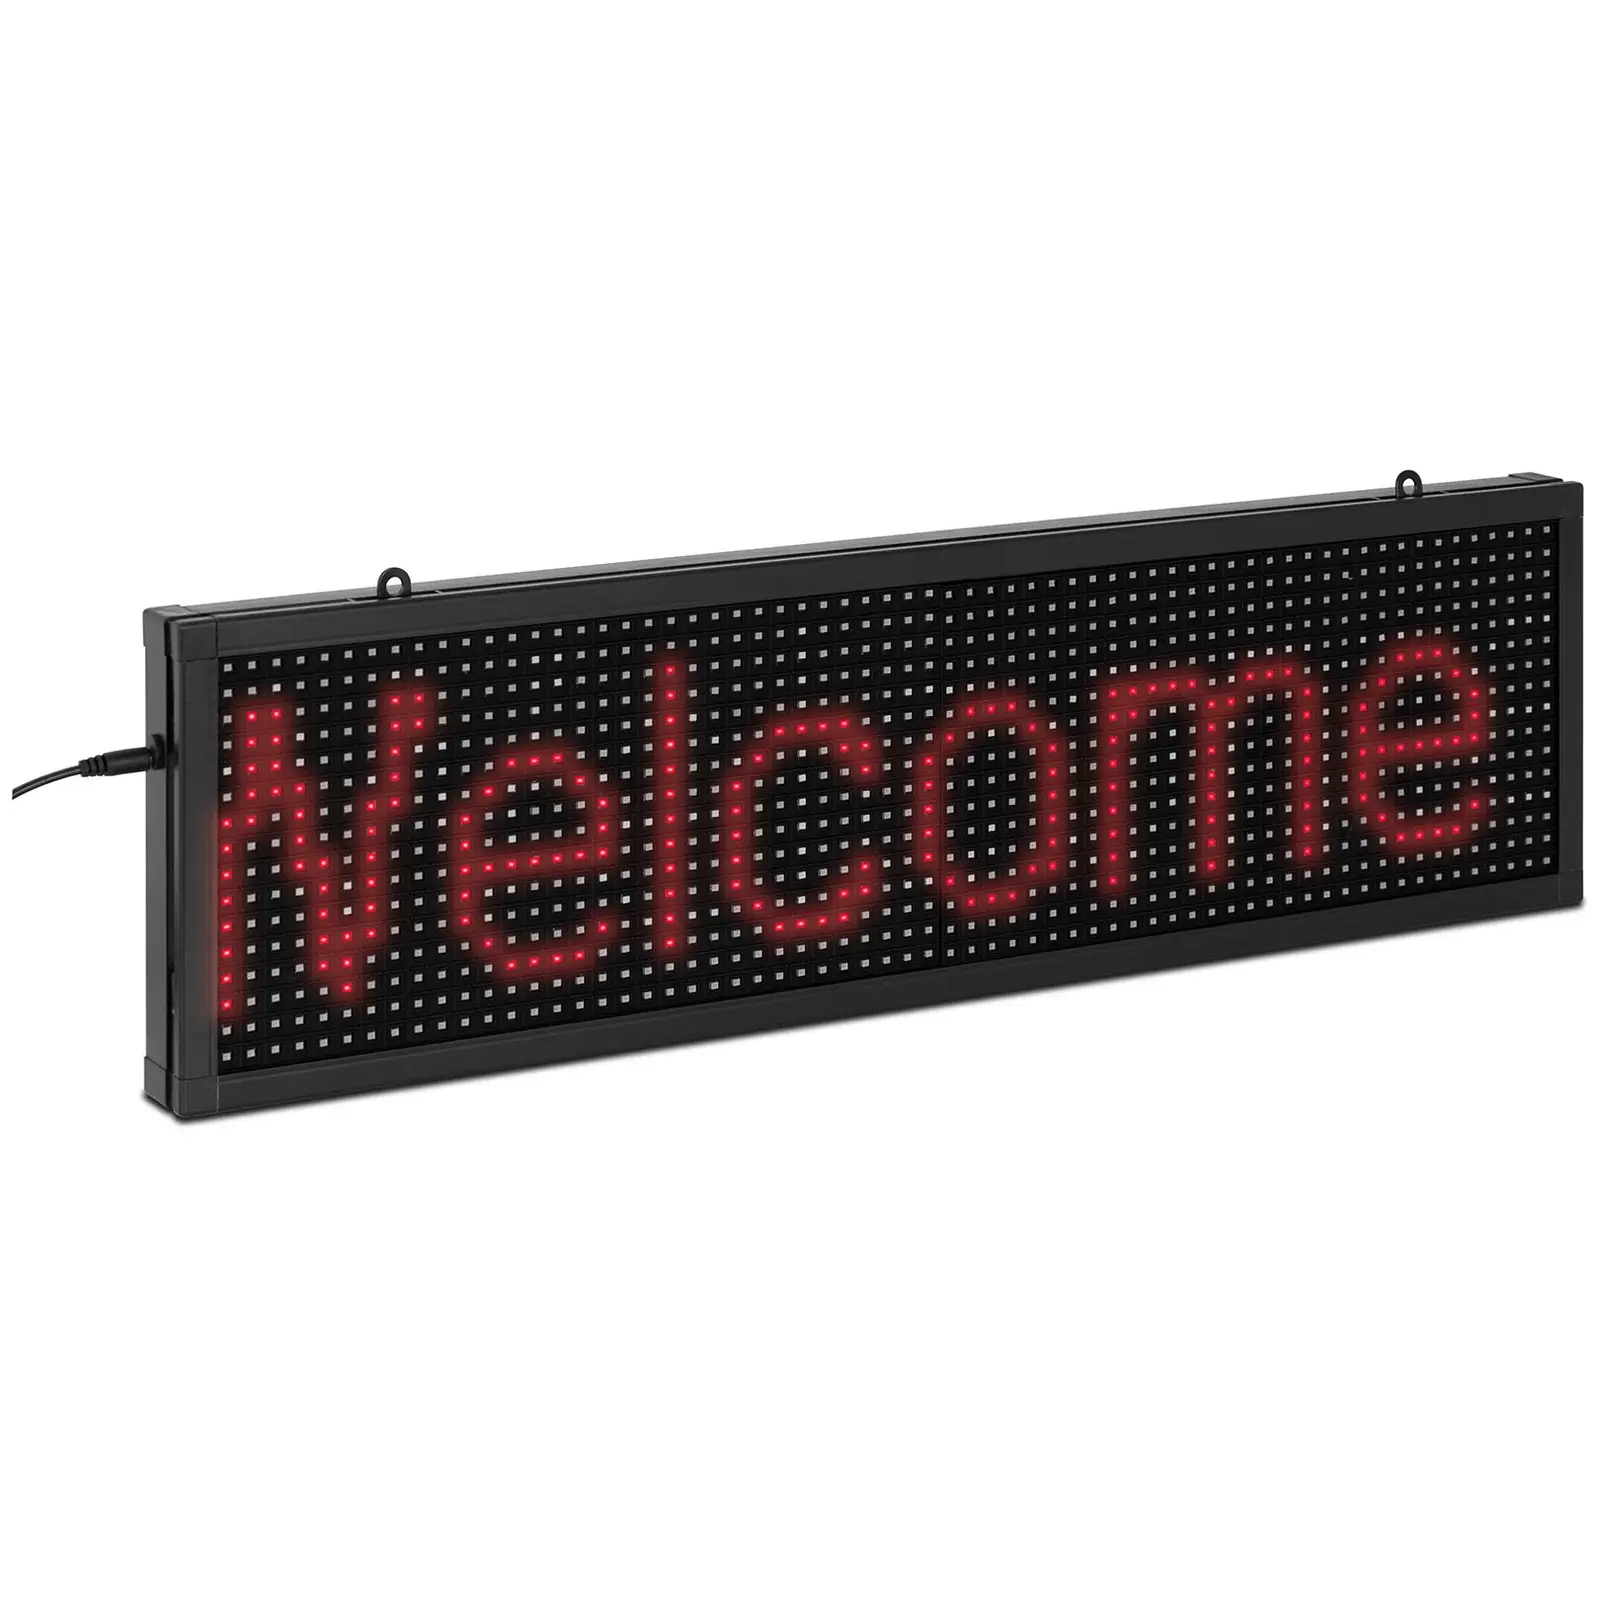 LED-Laufschrift - 64 x 16 rote LED - 67 x 19 cm - programmierbar via iOS / Android